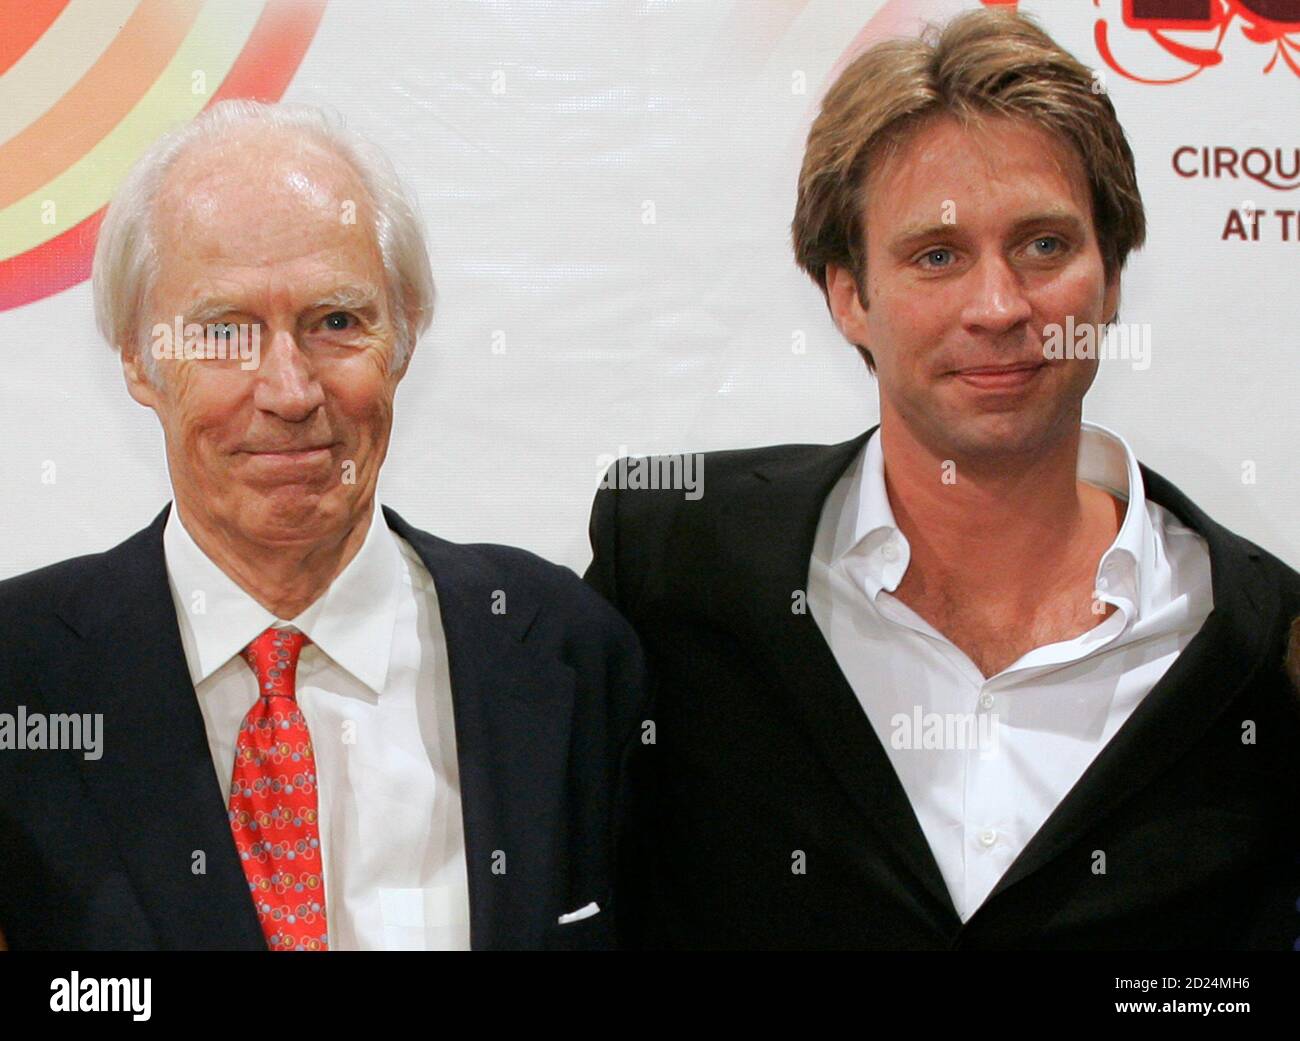 George Martin (L), the original Beatles producer, and his son Giles Martin arrive for the gala premiere of 'The Beatles LOVE by Cirque du Soleil' at the Mirage hotel and casino in Las Vegas, Nevada, June 30, 2006. Stock Photo